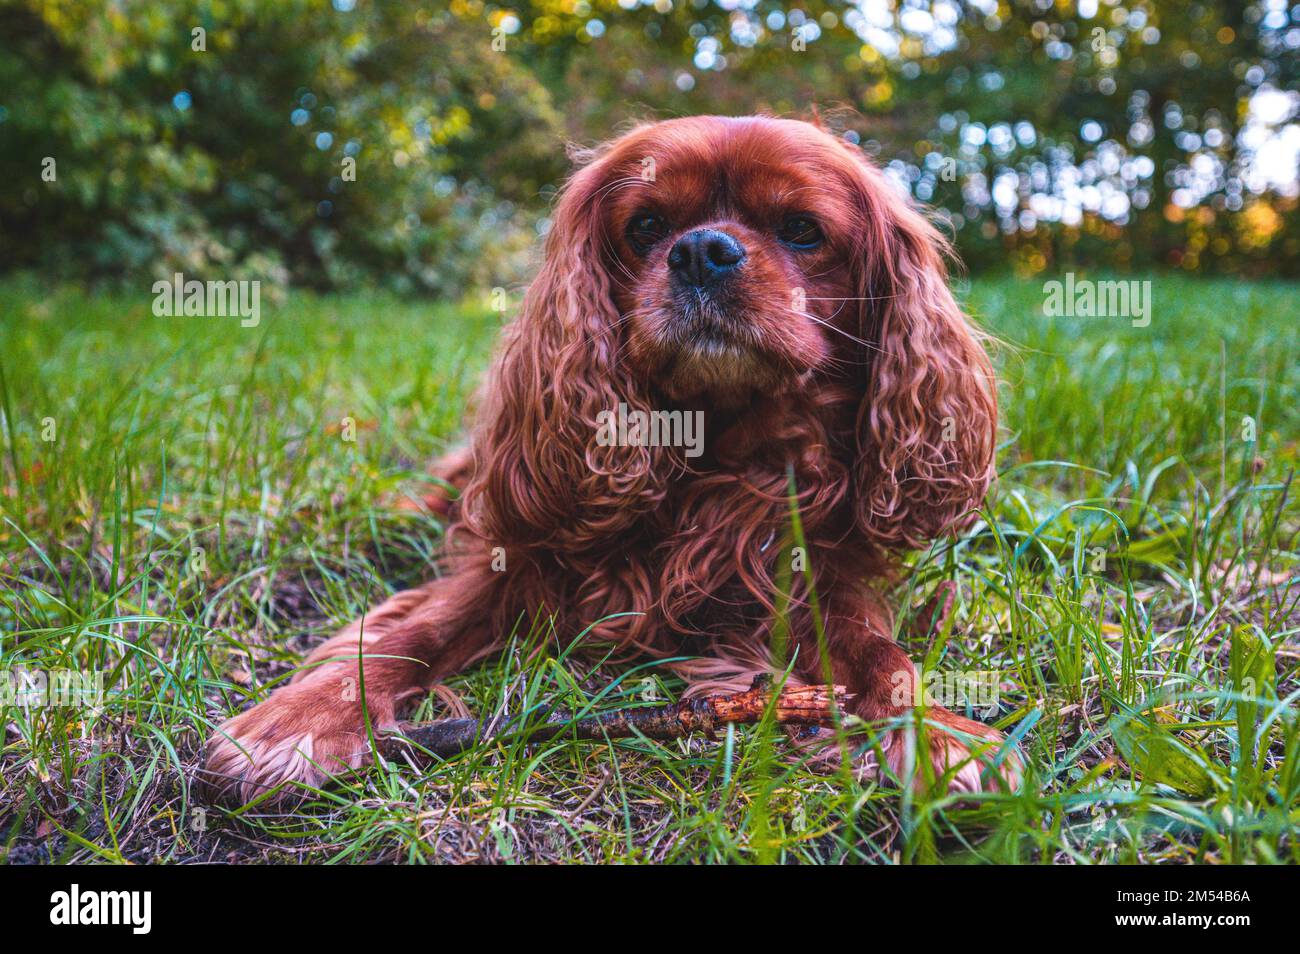 A dog (Cavalier King Charles Spaniel) with brown fur lies on a green meadow and looks directly into the camera, Hanover, Lower Saxony, Germany Stock Photo